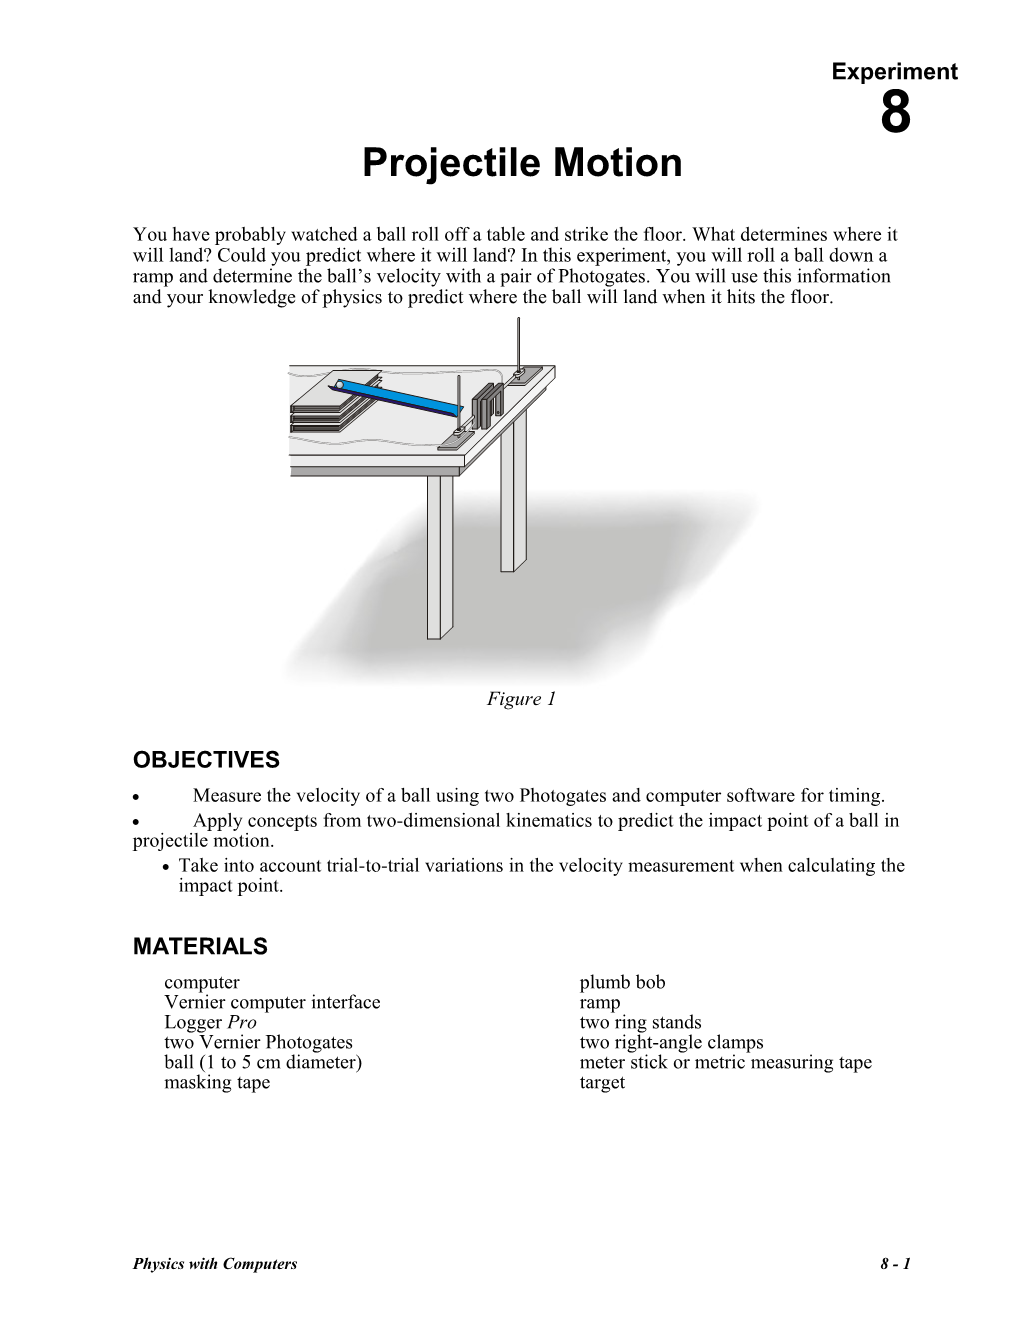 Projectile Motion s3